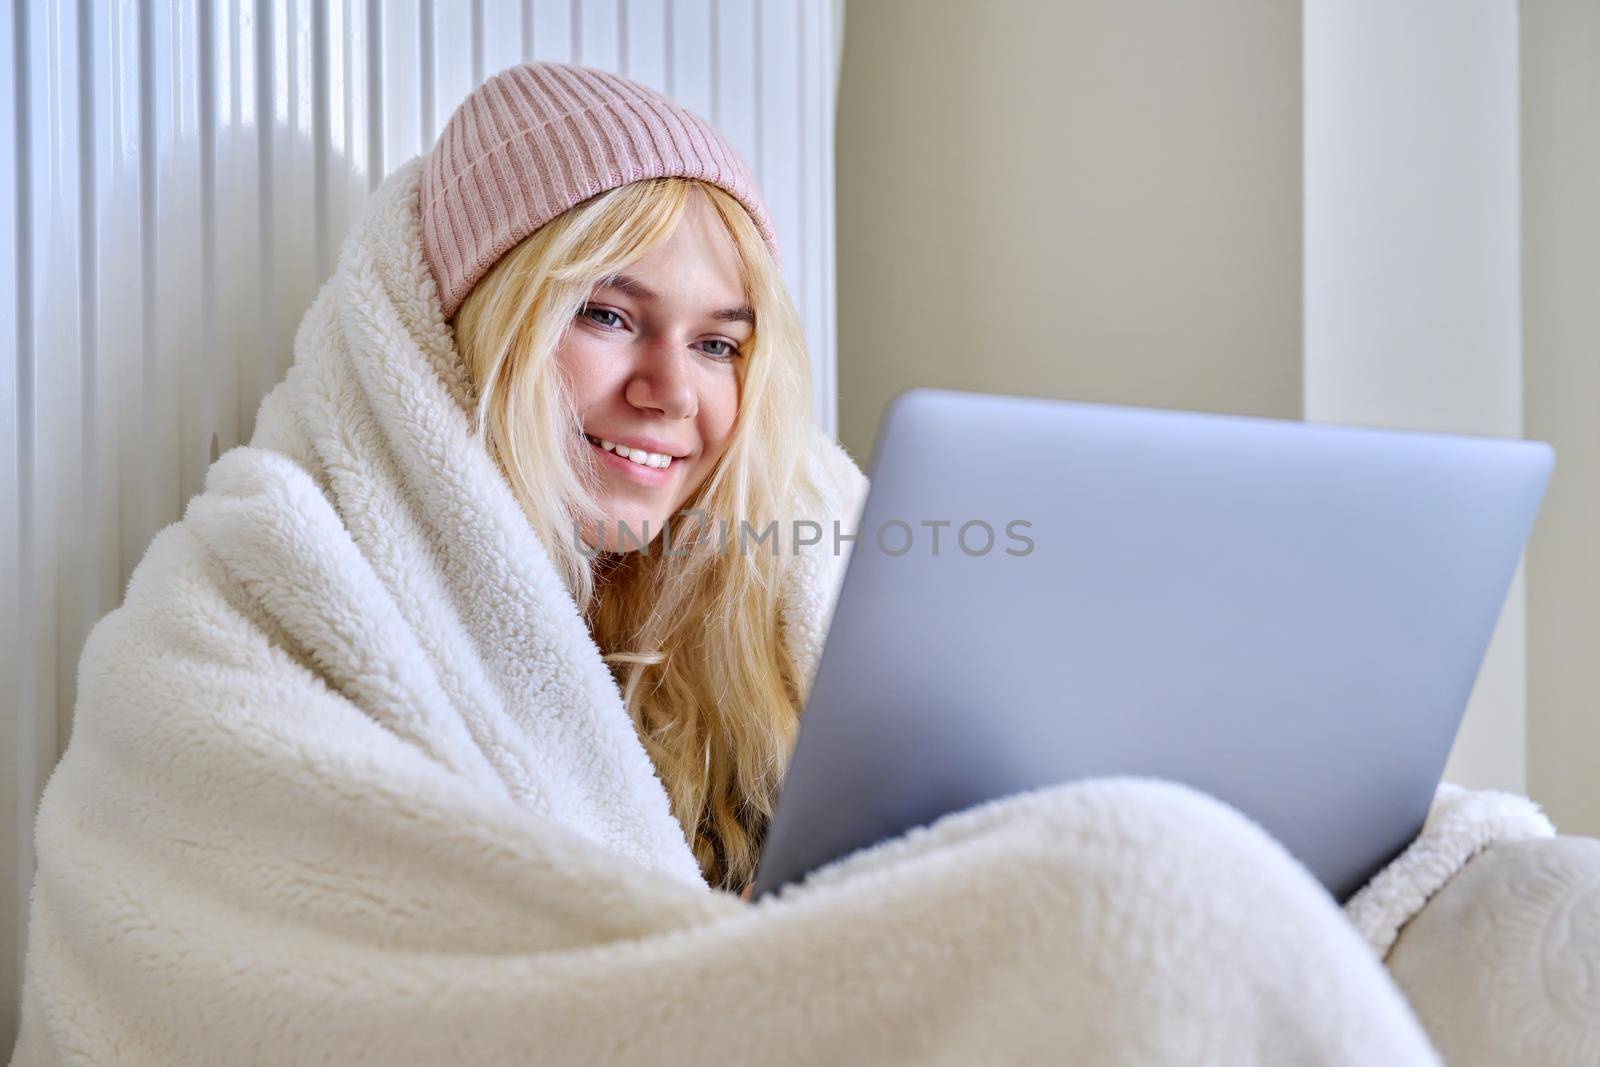 A young female teenager frozen in house in winter cold season, warming up with a warm blanket, hat, central heating radiator, looking at laptop screen, student, having rest